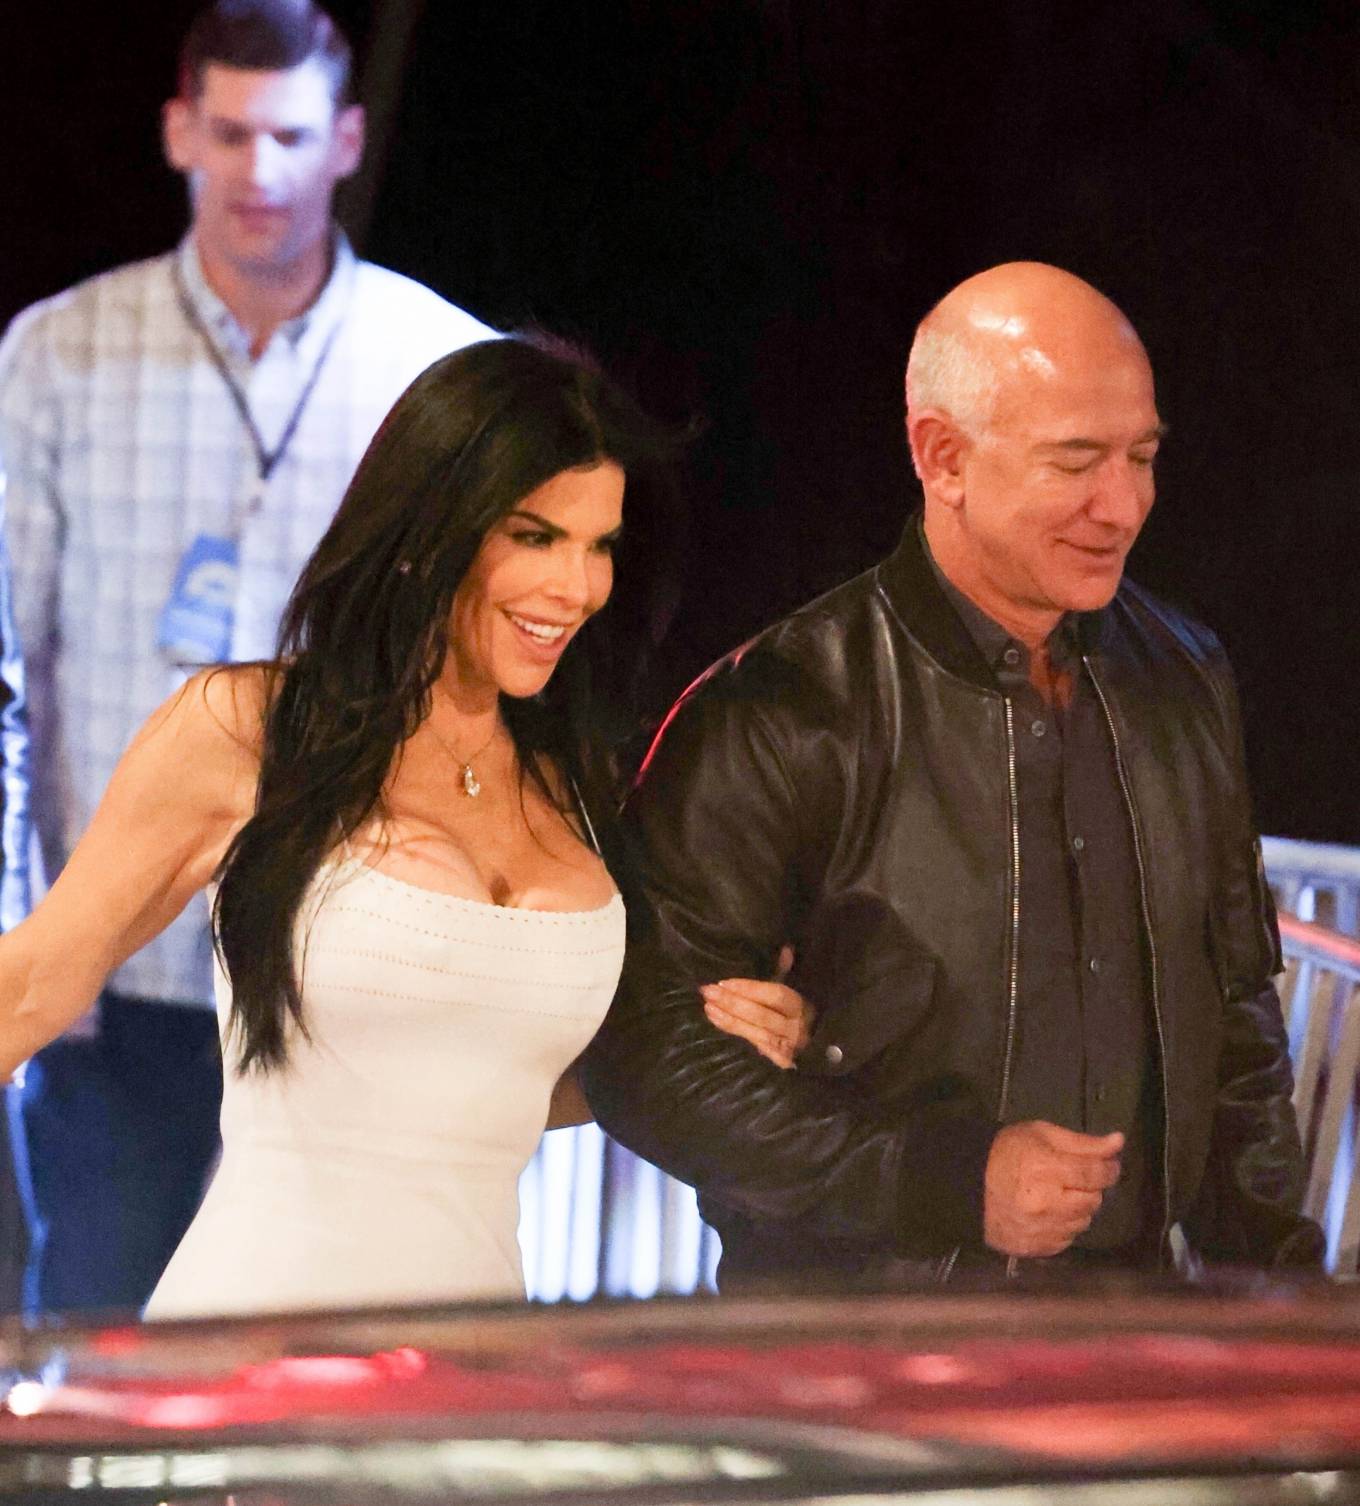 Lauren Sanchez - Partying at a private event in Los Angeles